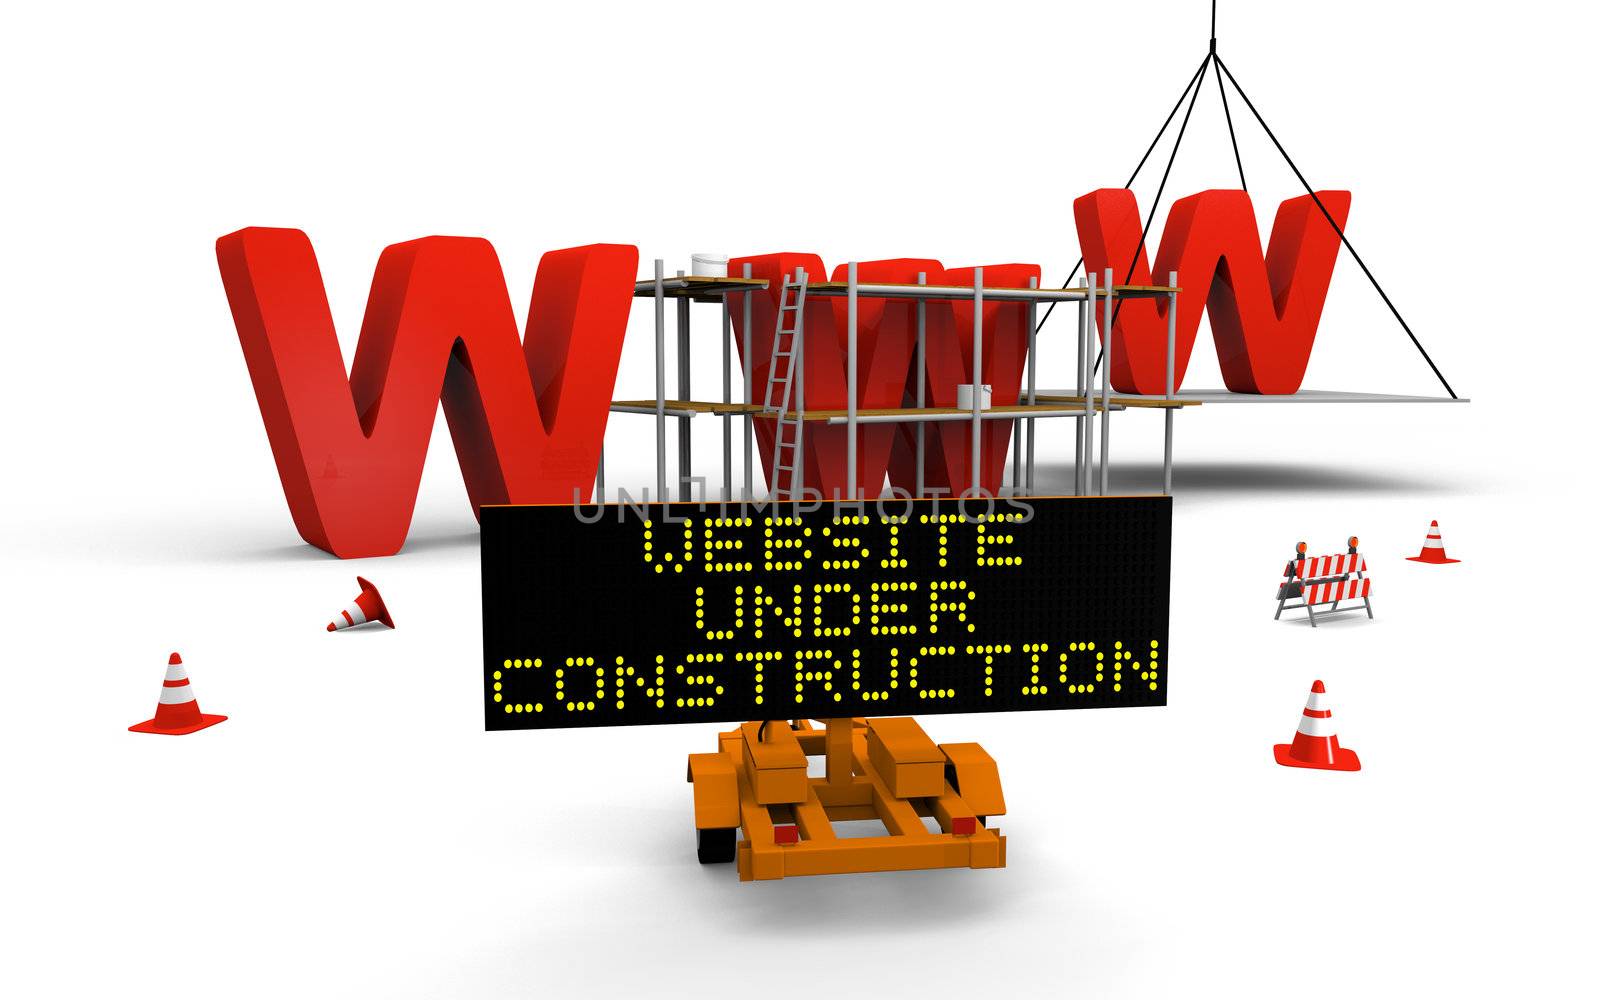 Concept of building website with letters www being built and painted, traffic sign, barriers and cones spread across